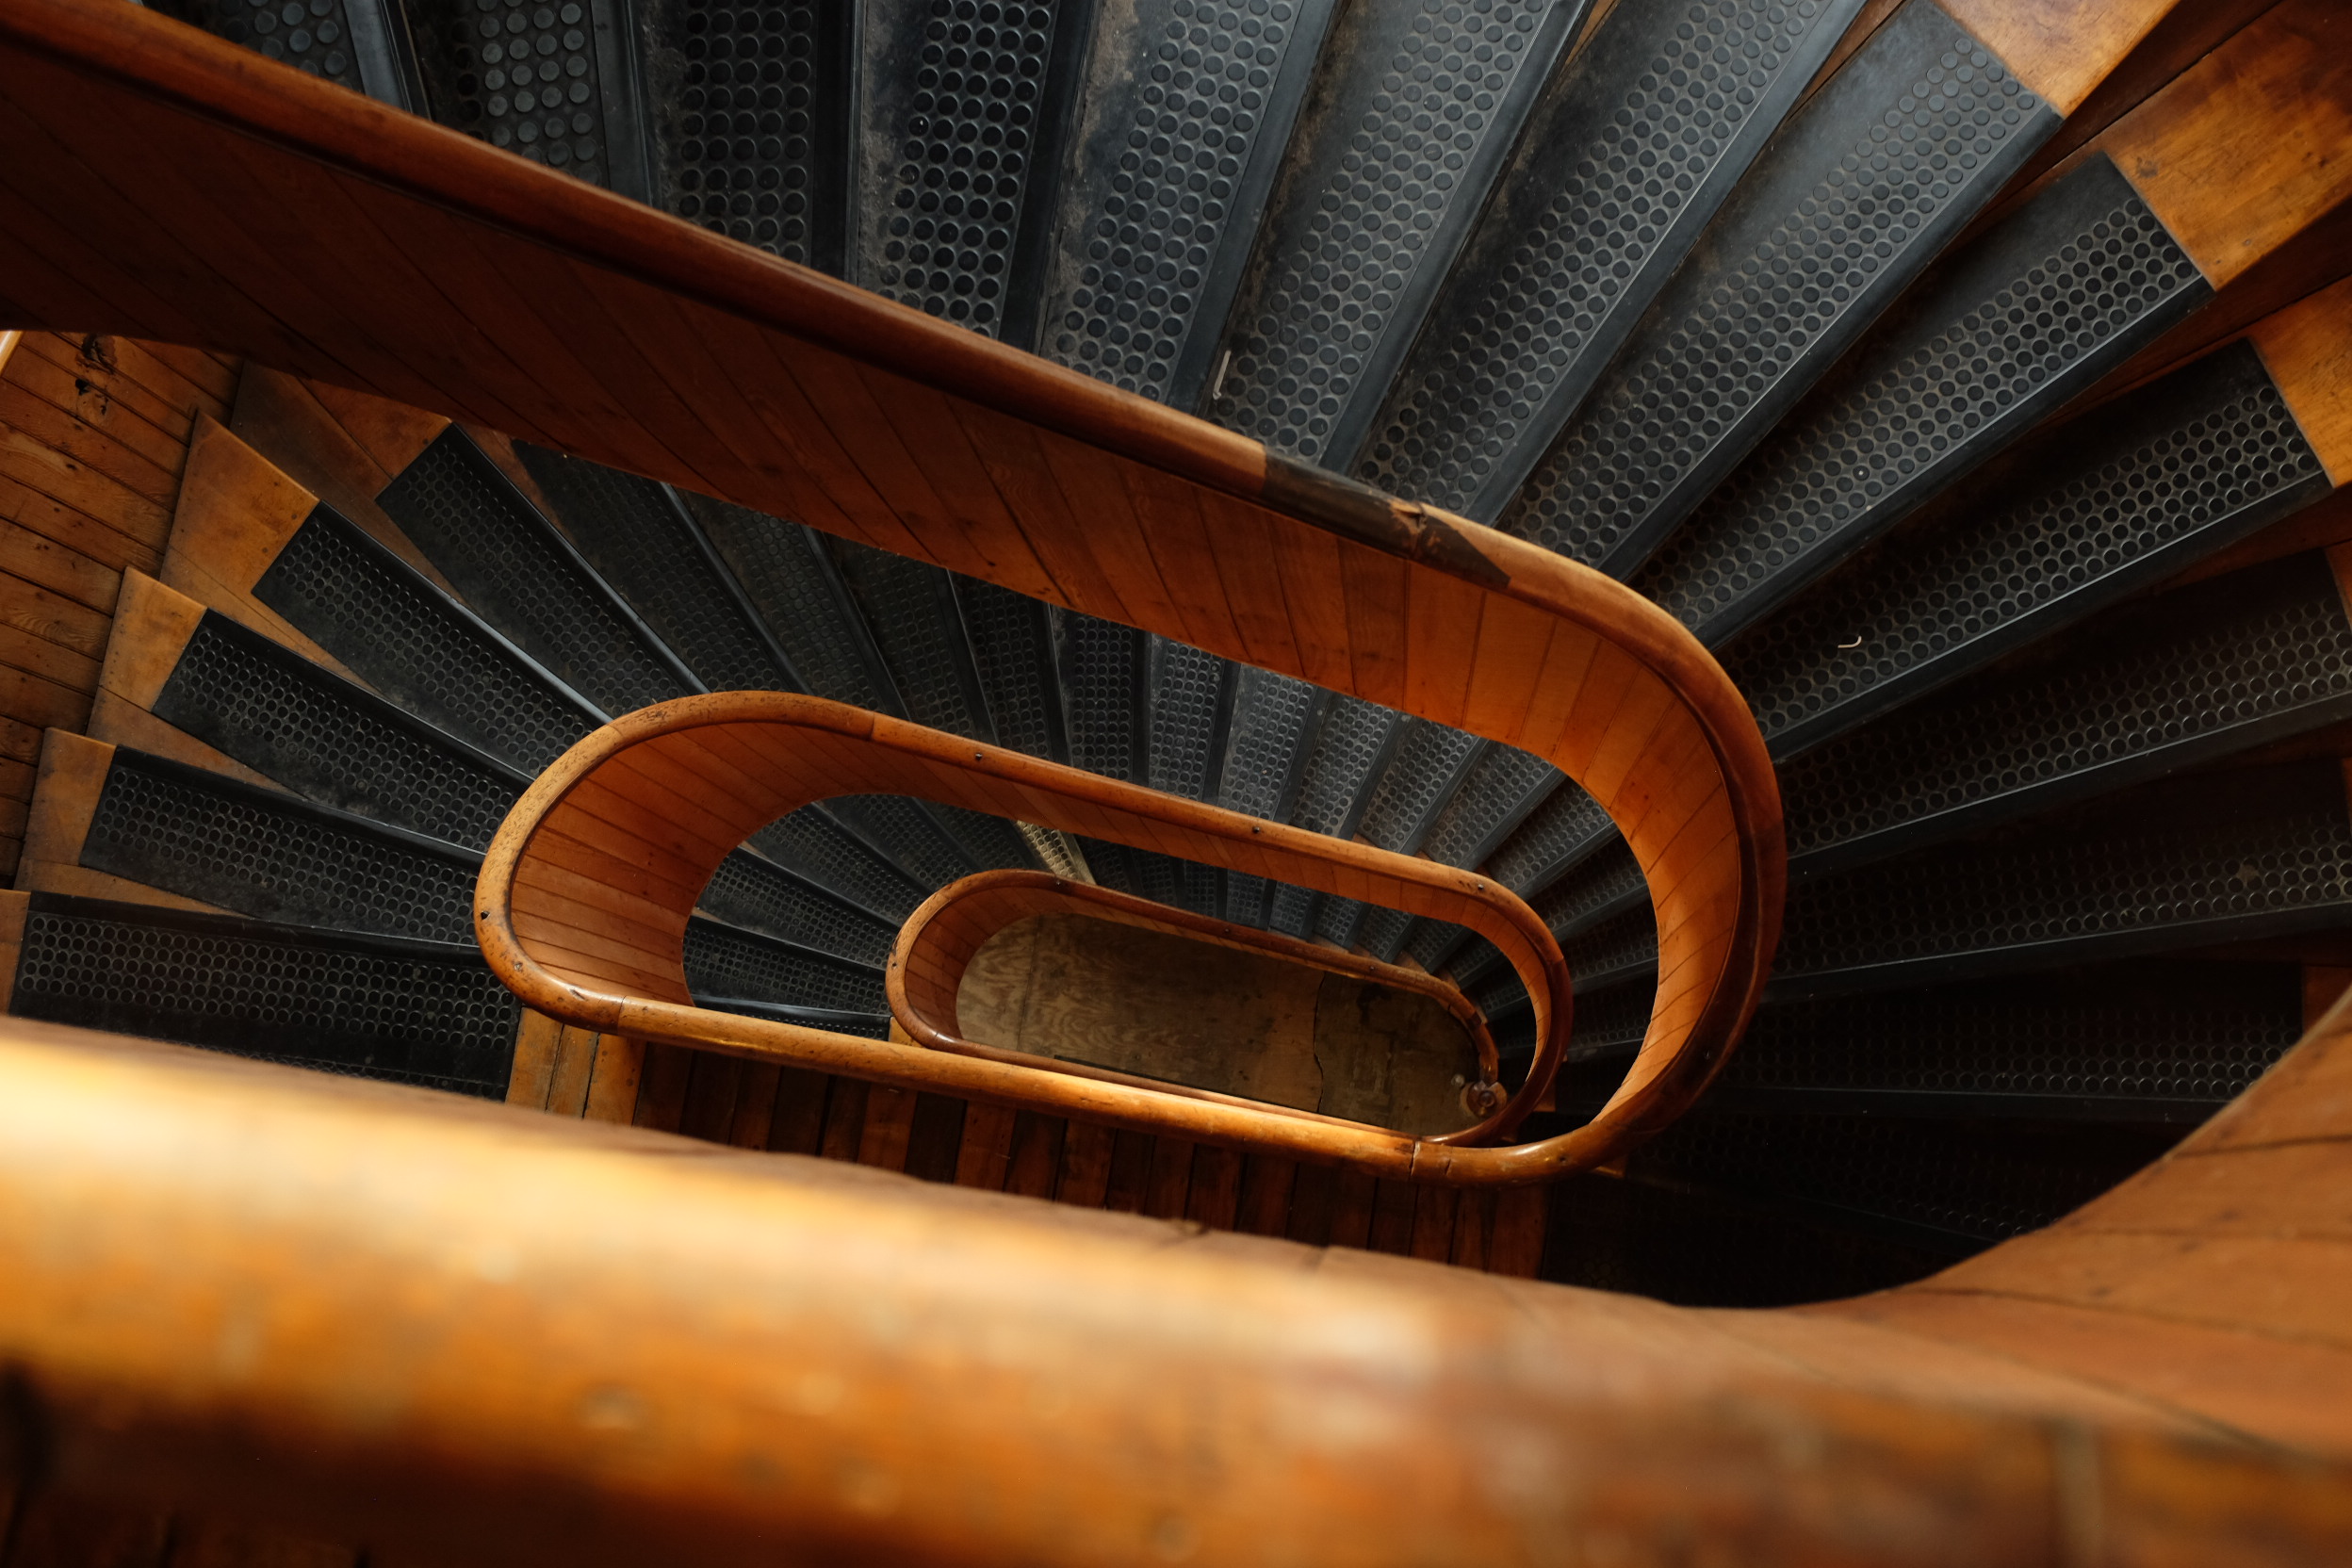 A photo looking down the center of a wooden spiral staircase.